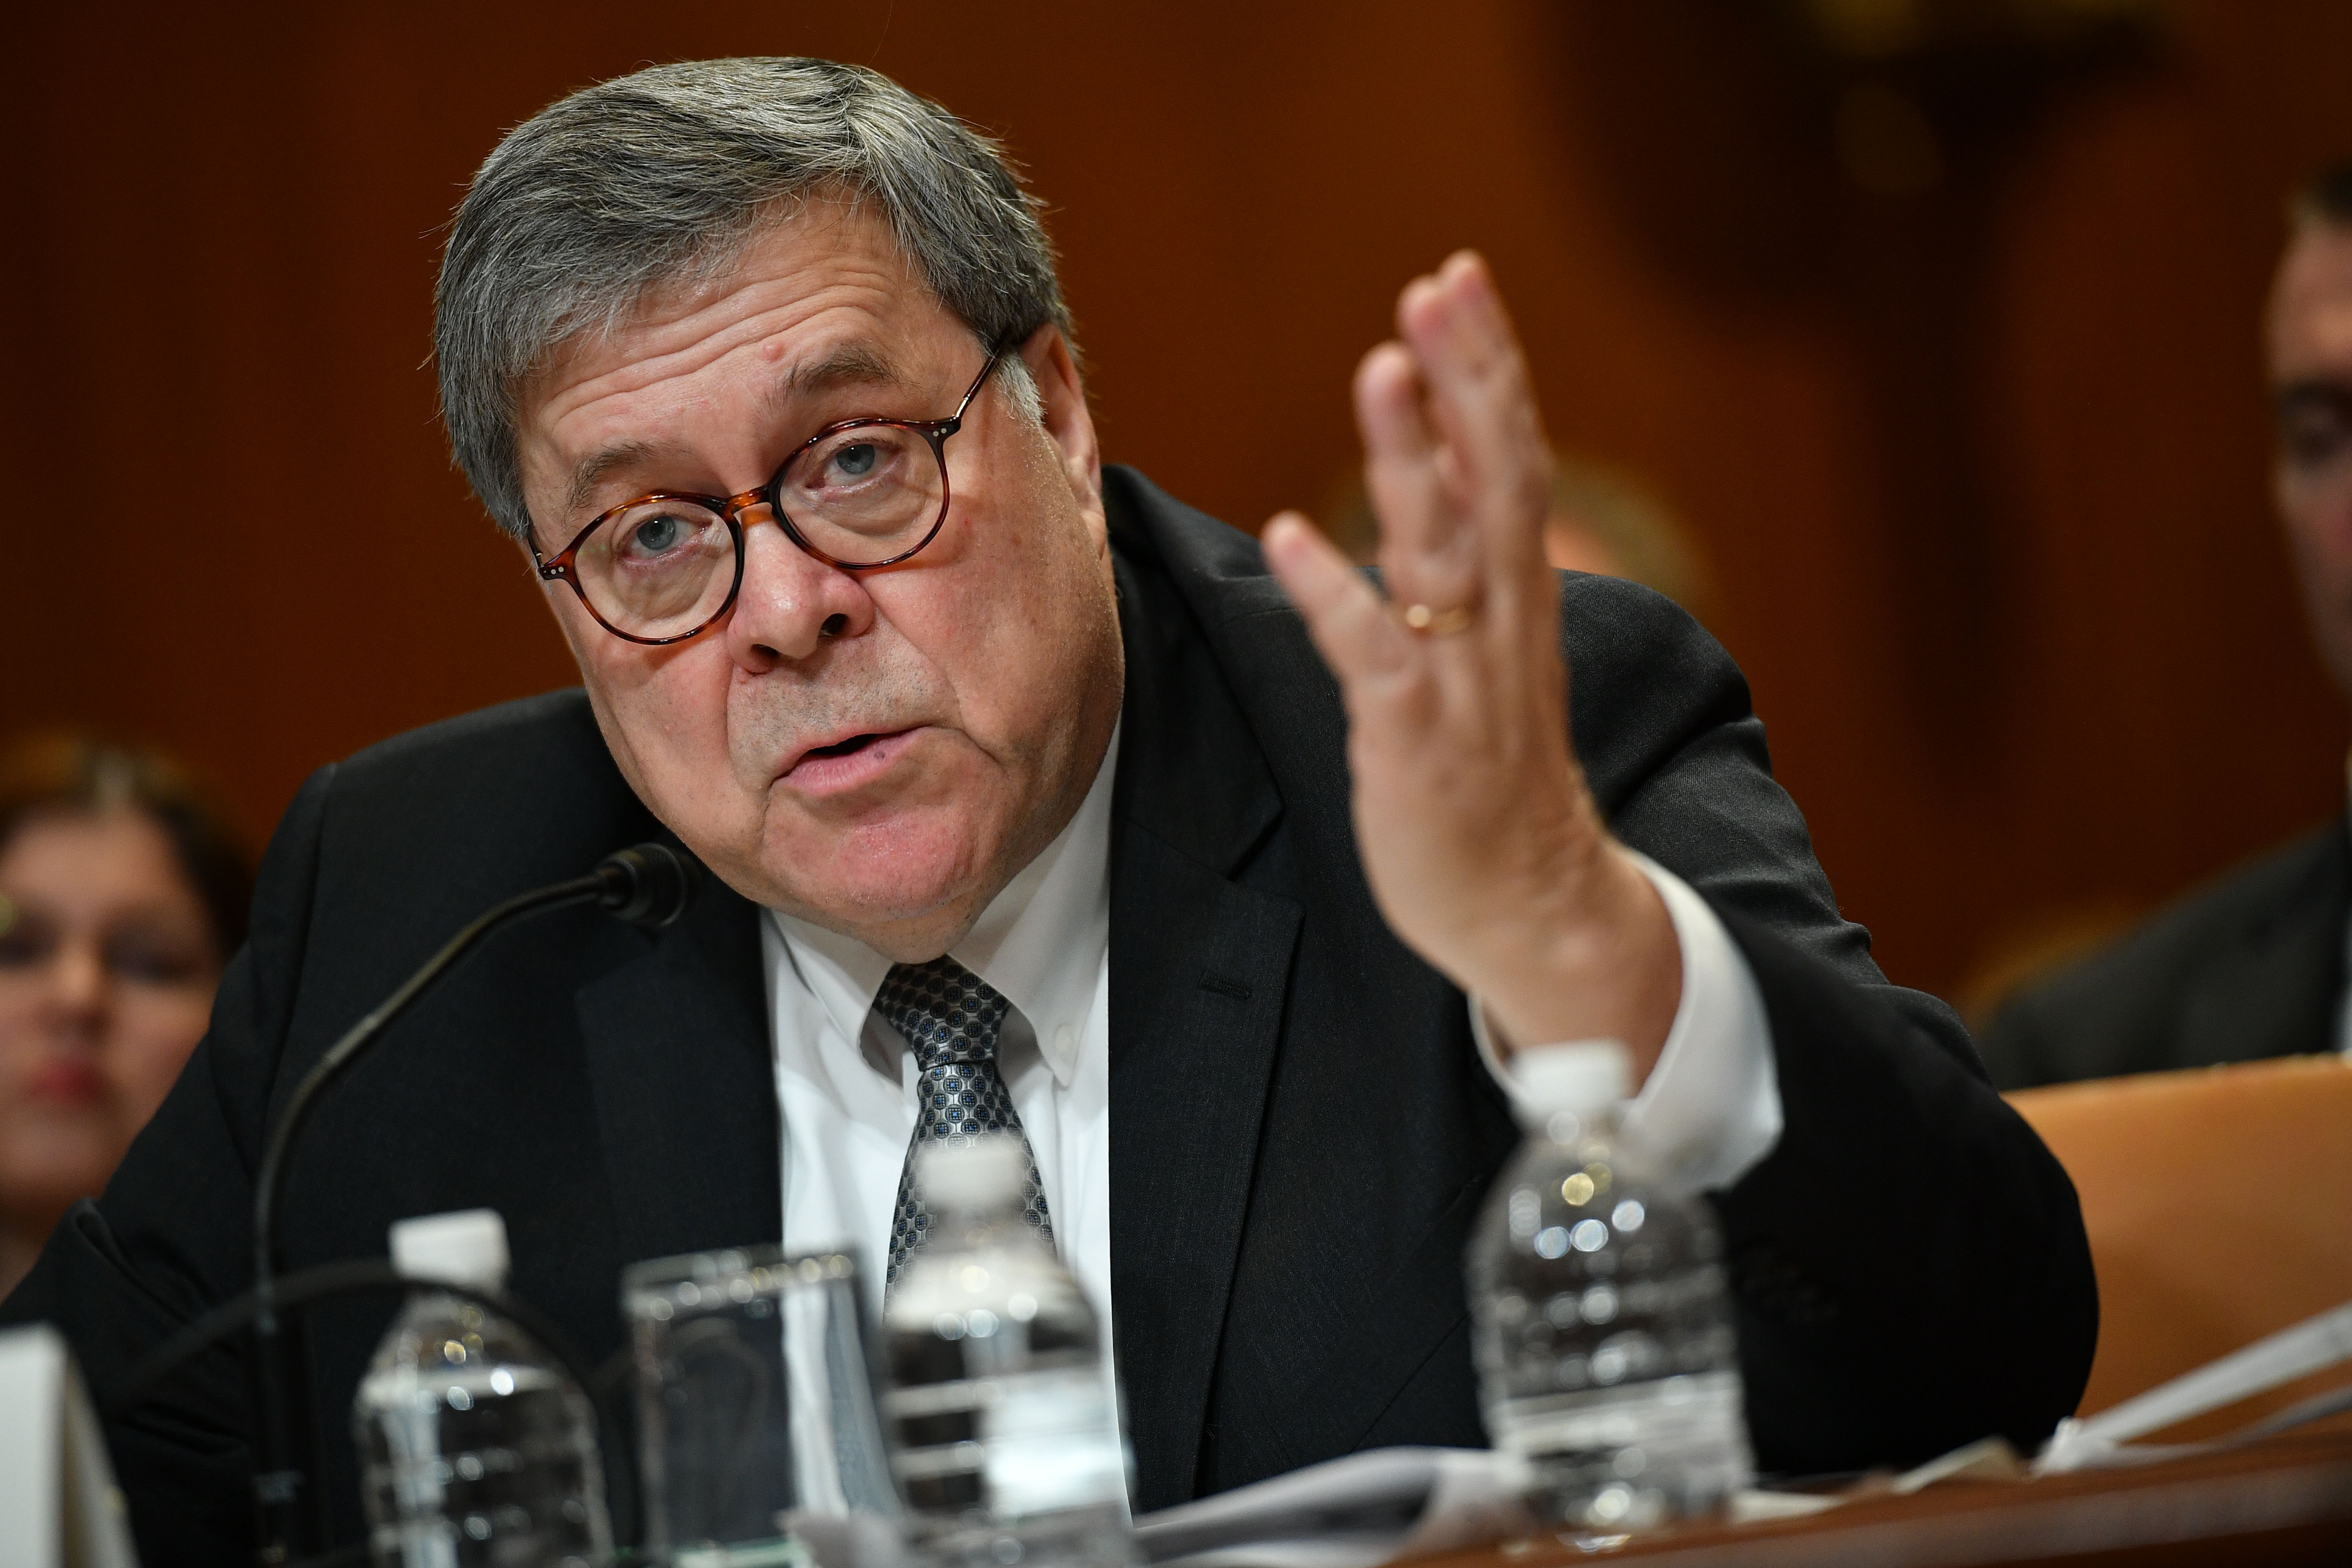 US Attorney General William Barr testifies during a US House Commerce, Justice, Science, and Related Agencies Subcommittee hearing on the Department of Justice Budget Request for Fiscal Year 2020, on Capitol Hill in Washington, DC, April 10, 2019. (MANDEL NGAN/AFP/Getty Images)